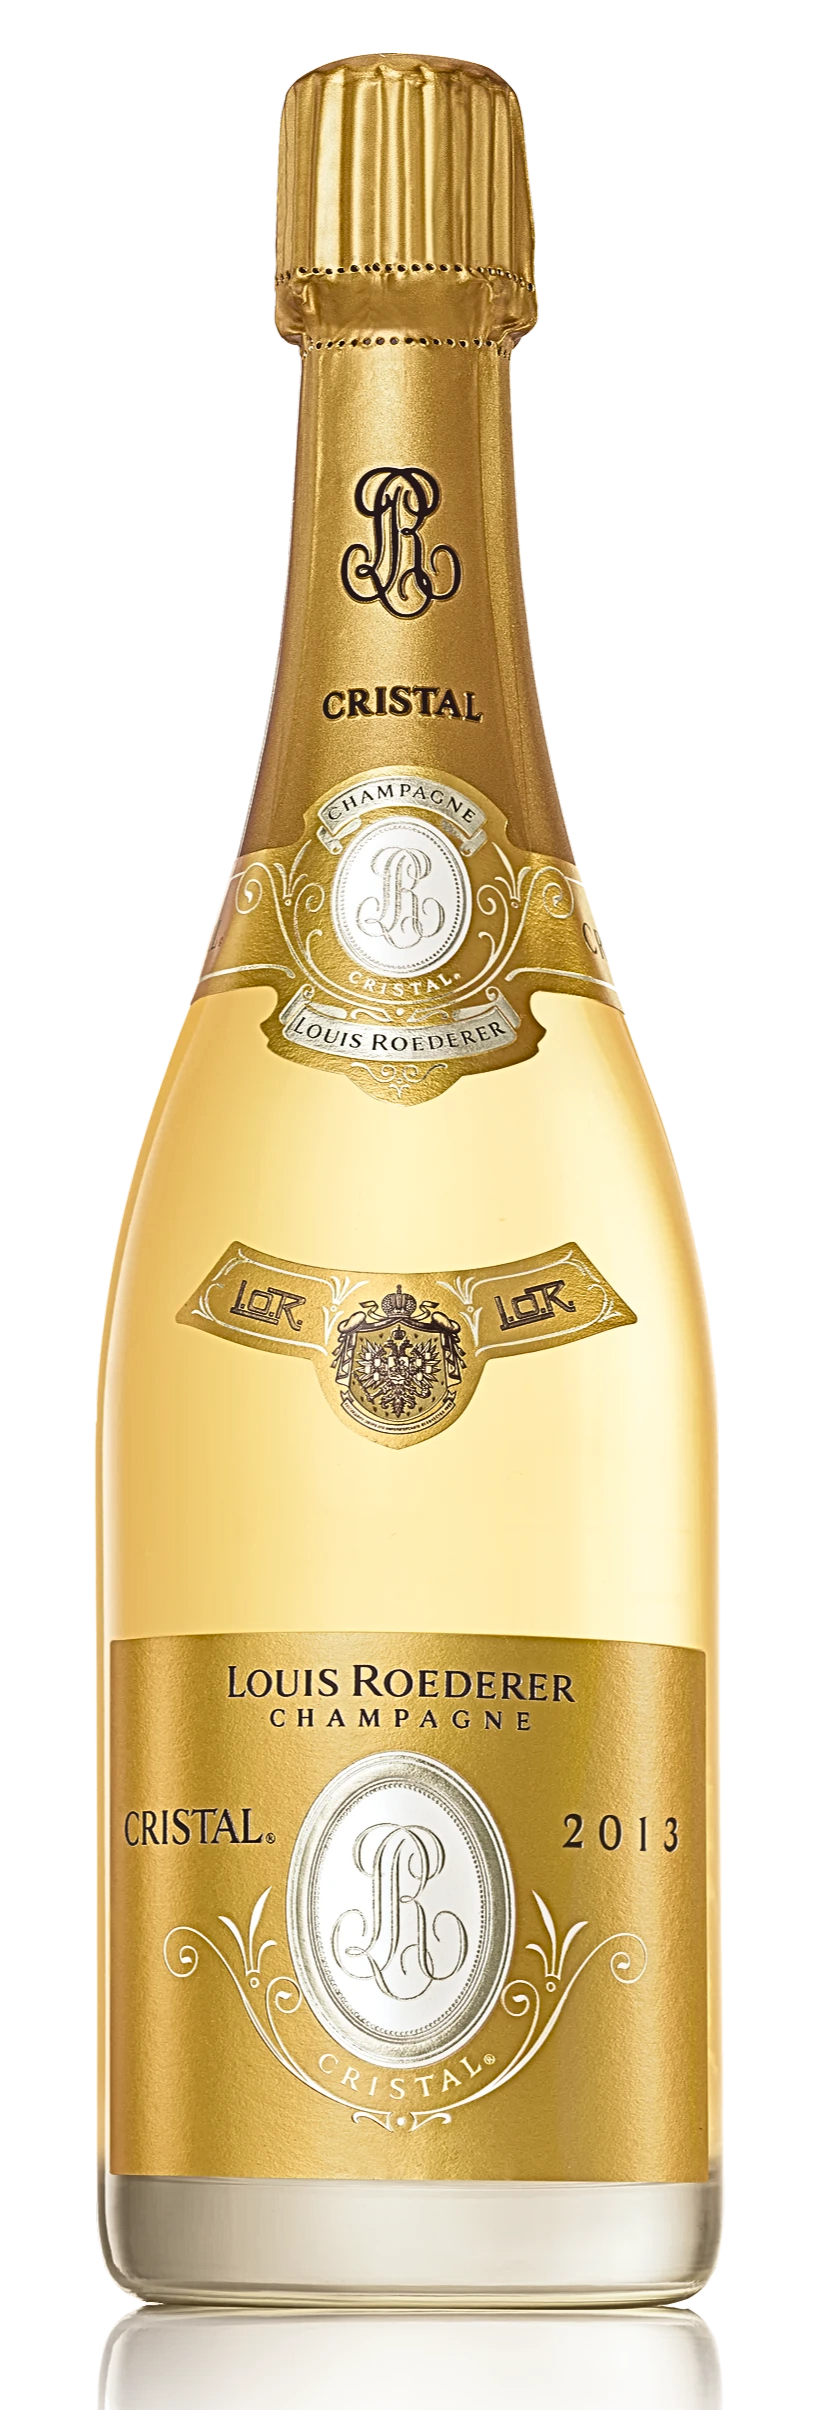 Champagne Louis Roederer Cristal 2013 (RP:98)